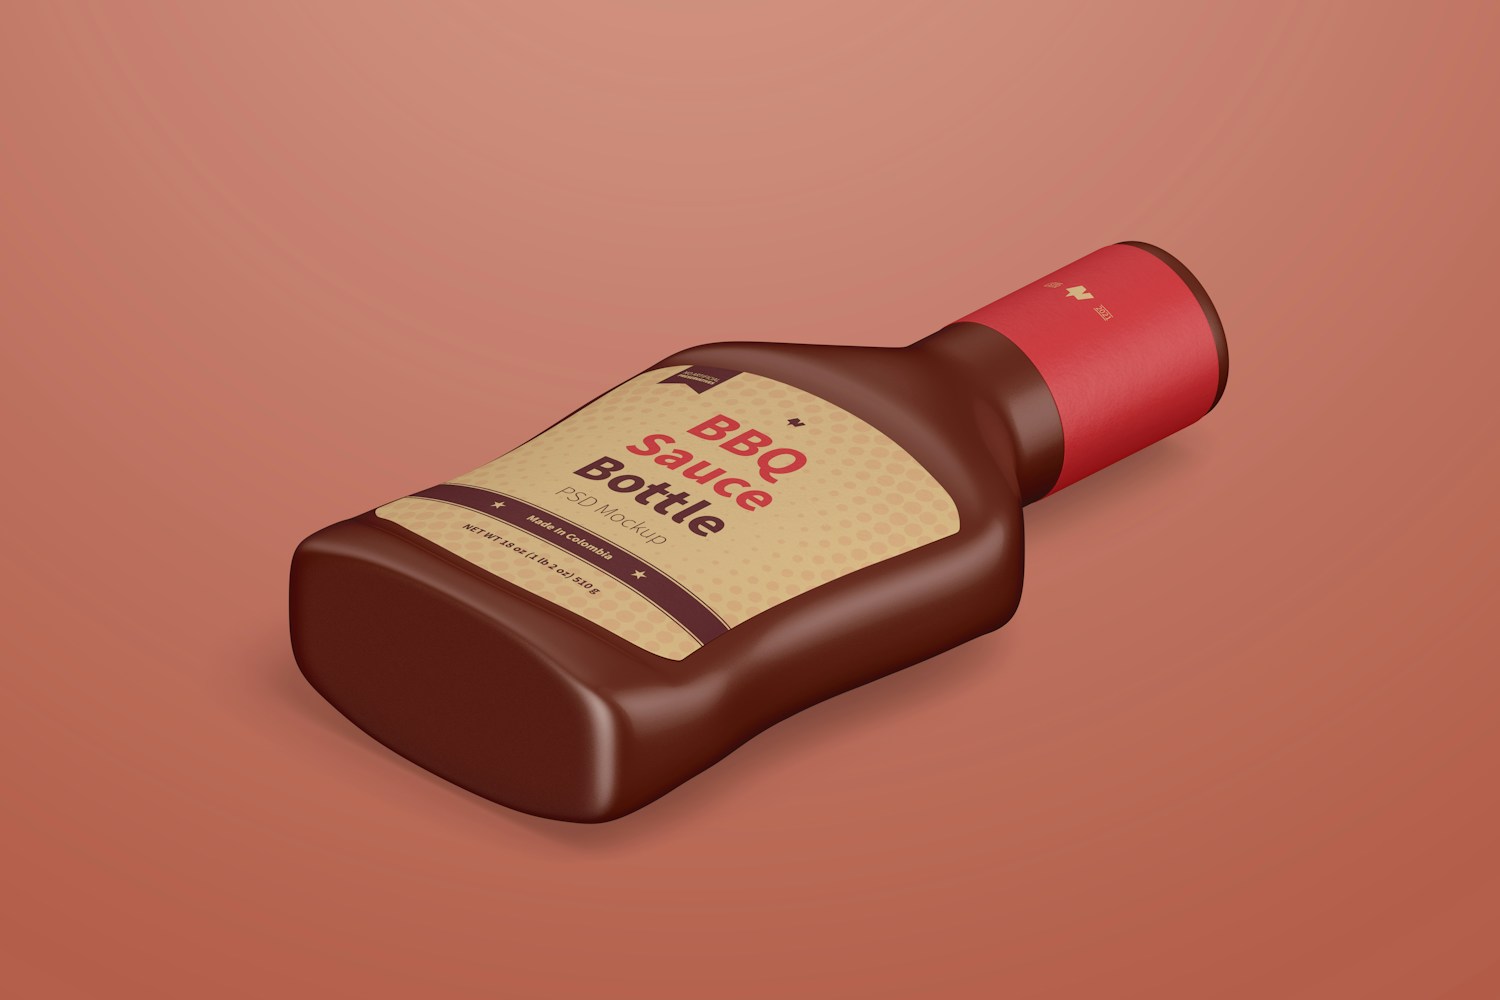 Barbecue Sauce Bottle Mockup, Isometric View